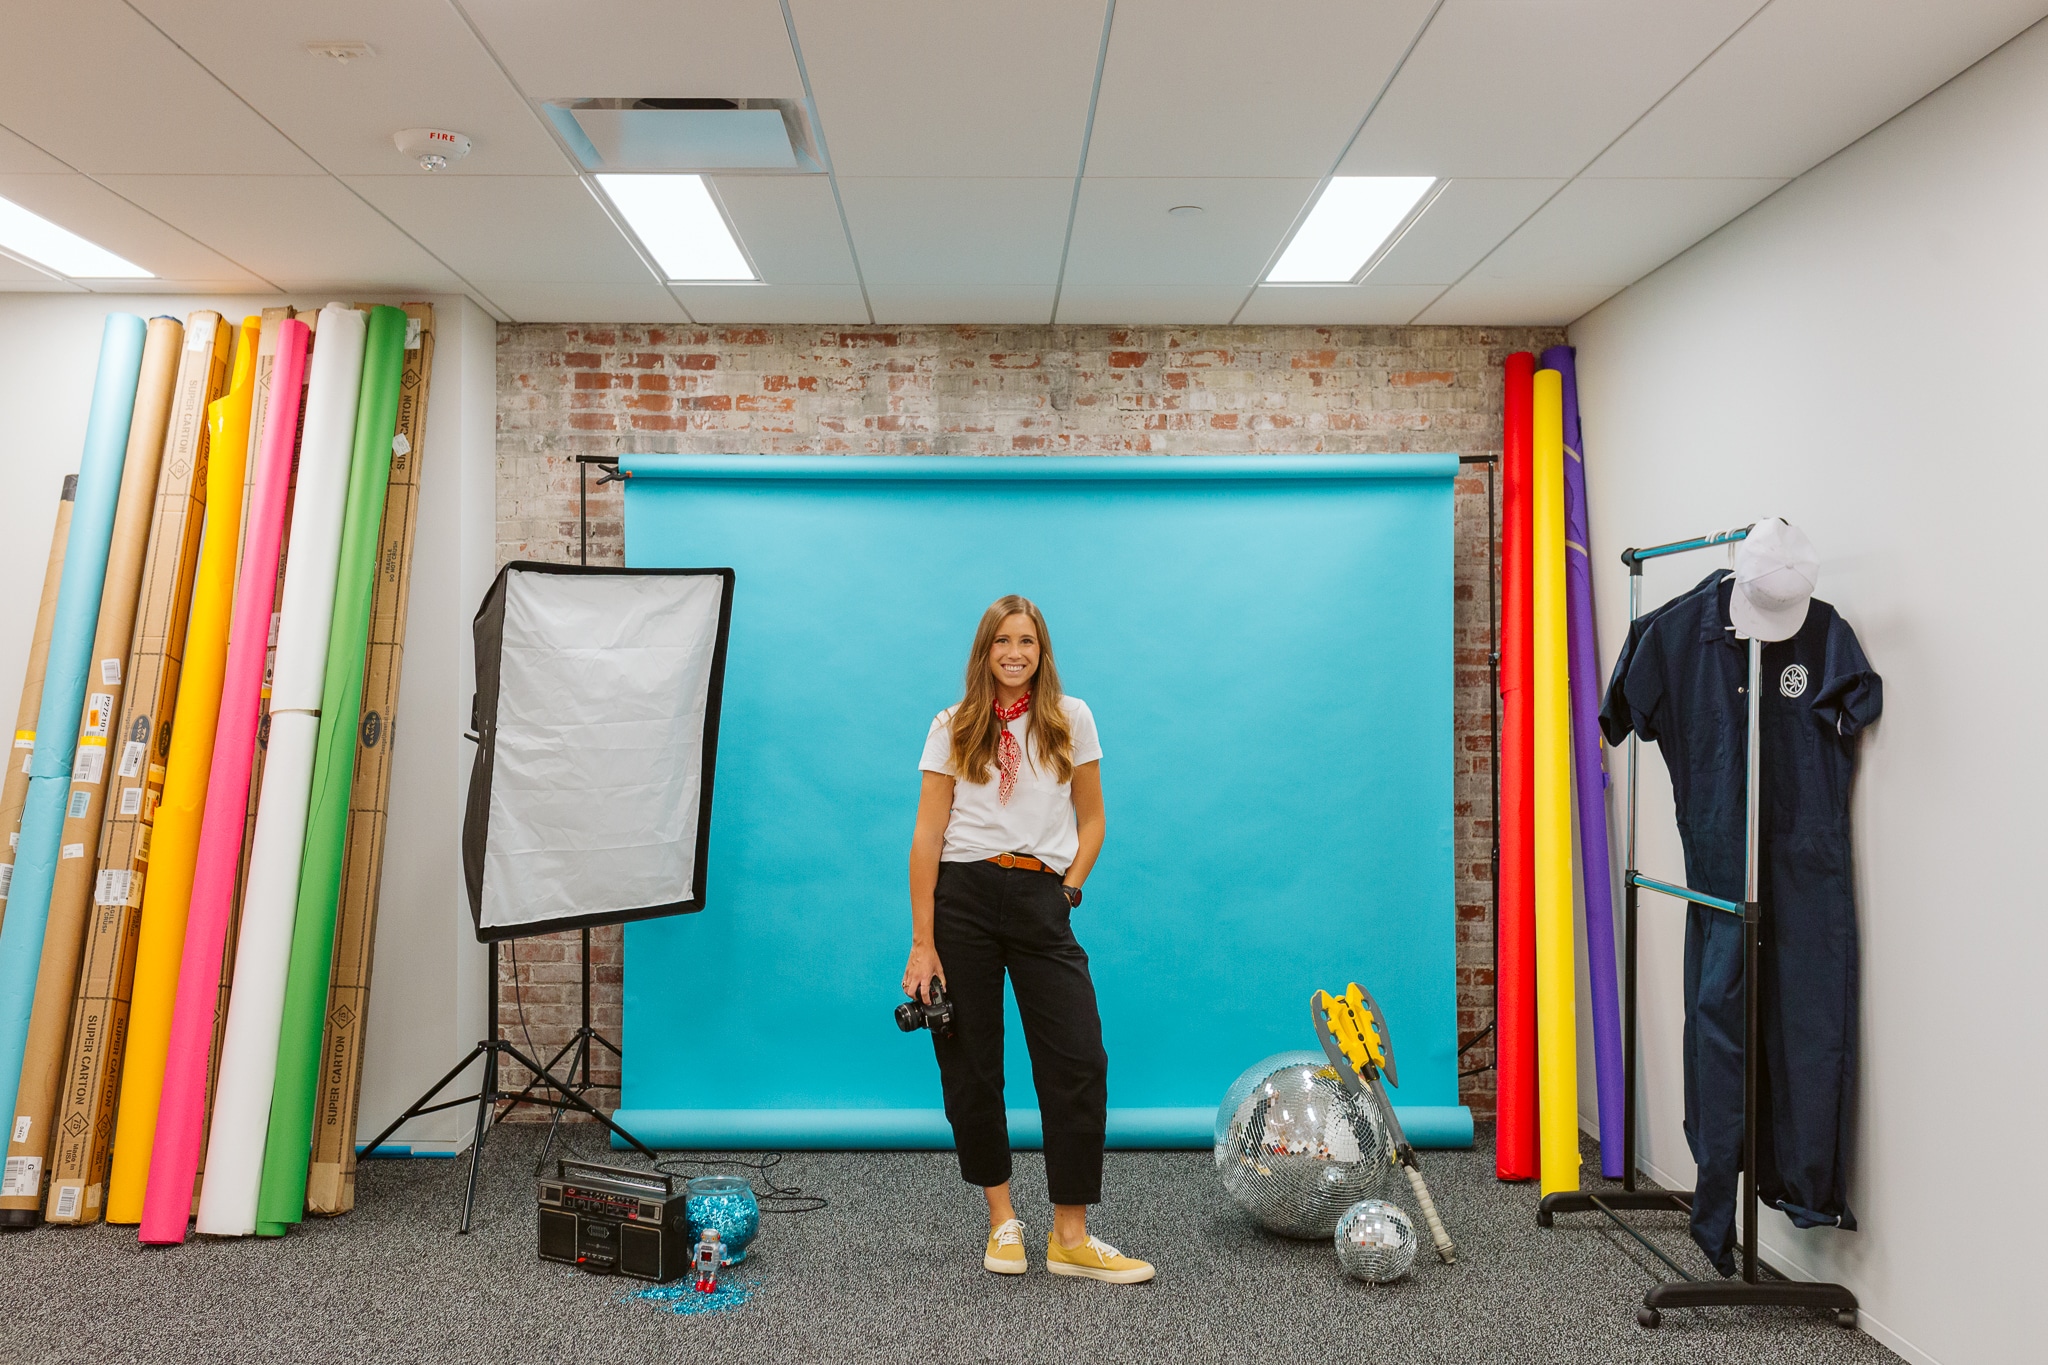 Humanizing hosting: What I’ve learned as a photographer in tech